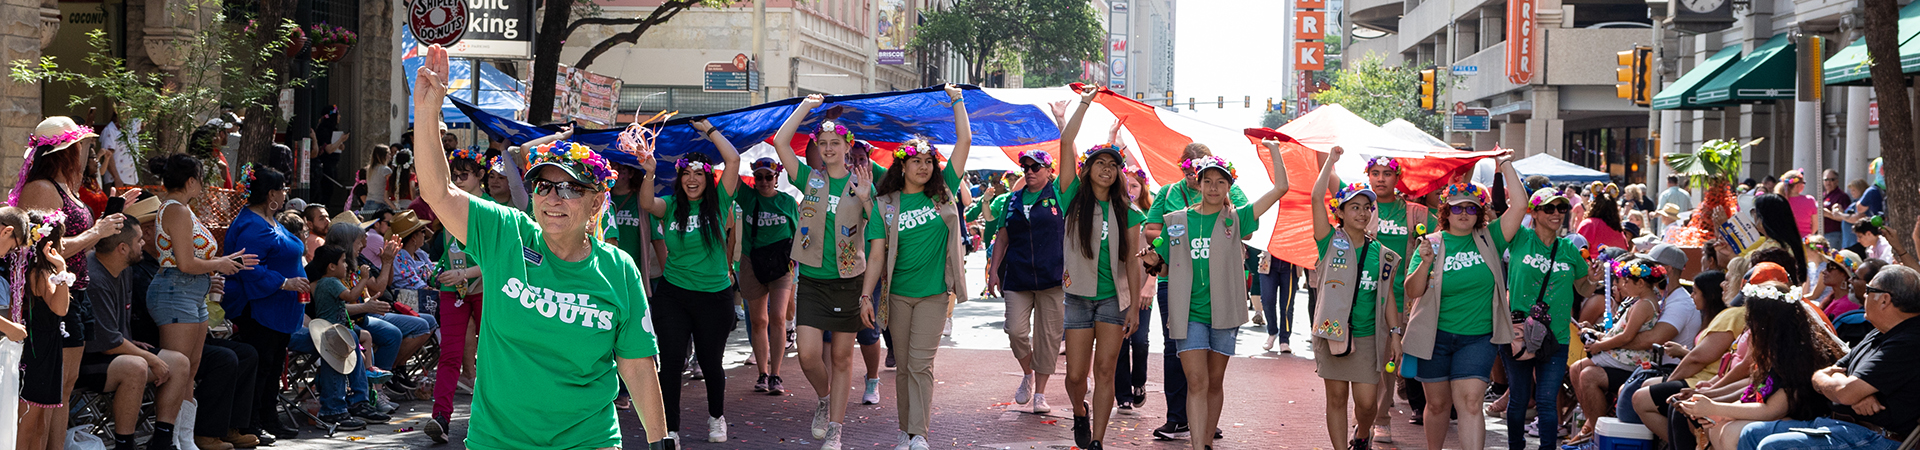  GSSWT CEO Angie Salinas marching in front of Girl Scouts holding up American flag in the Battle of Flowers parade 